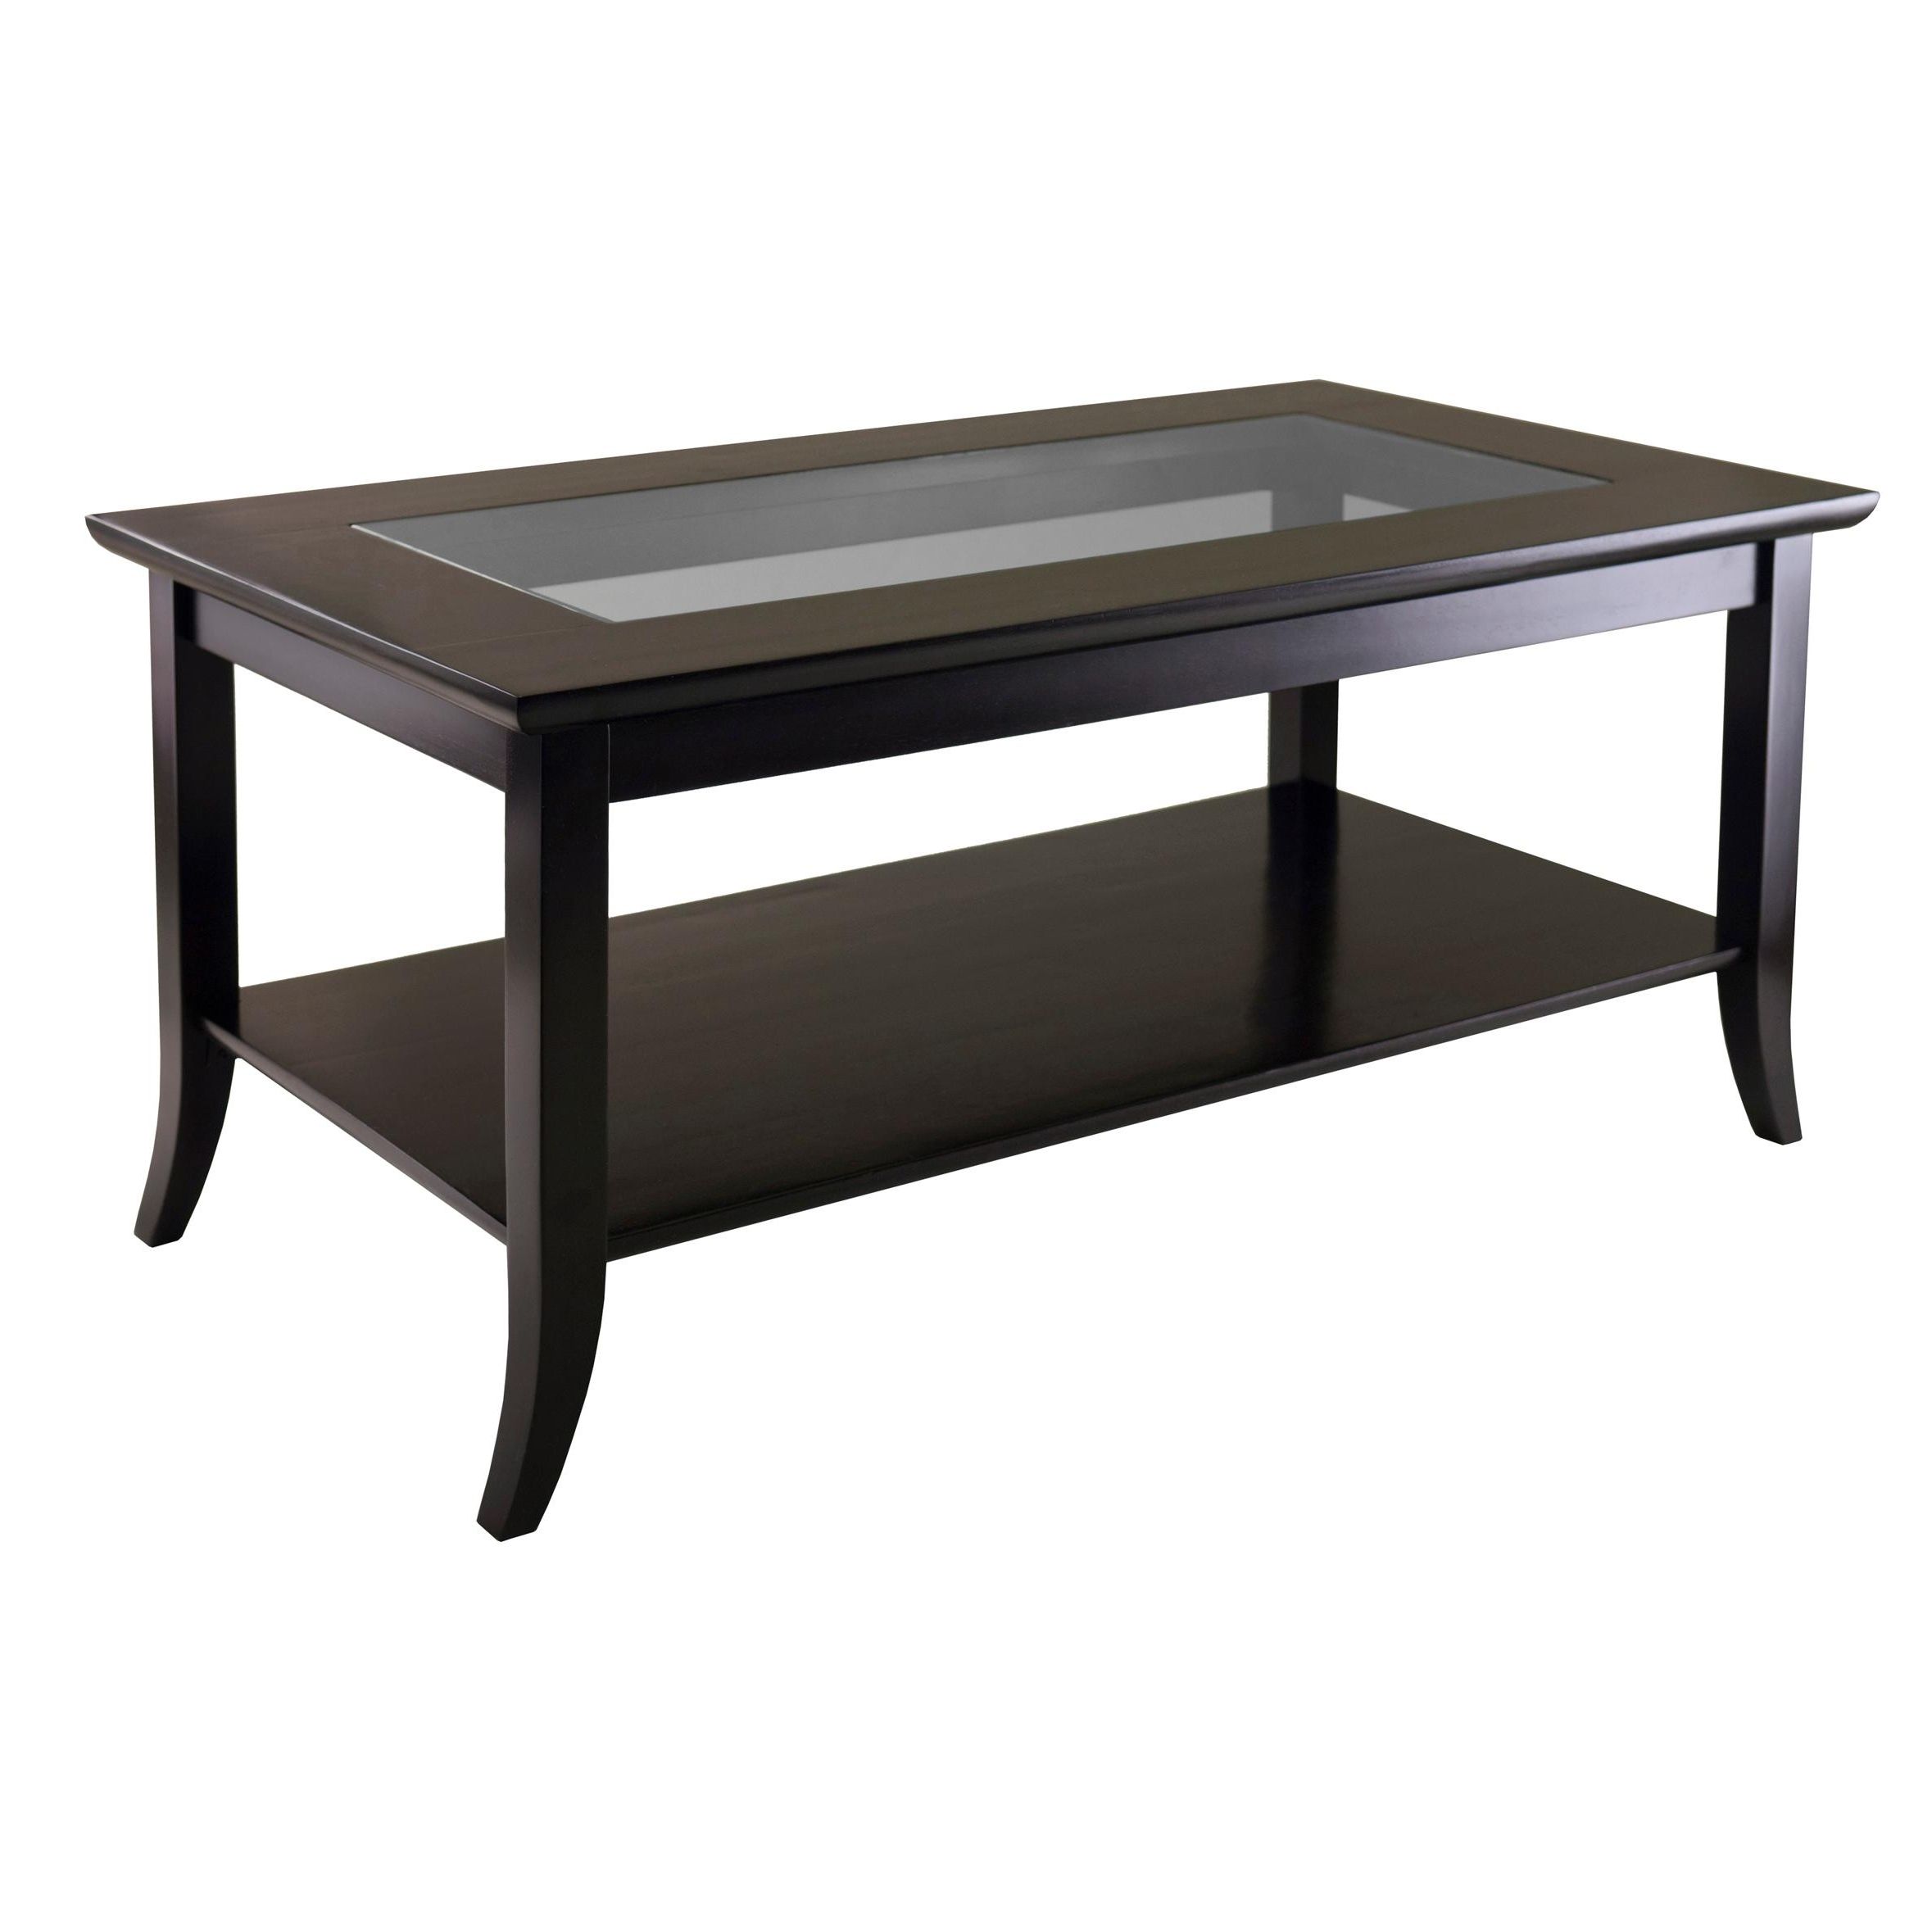 Lovely Table Top Coffee Loon Peak Bryan Lift Reviews Wayfair – Just With Regard To Latest Jaxon Grey Lift Top Cocktail Tables (View 3 of 20)